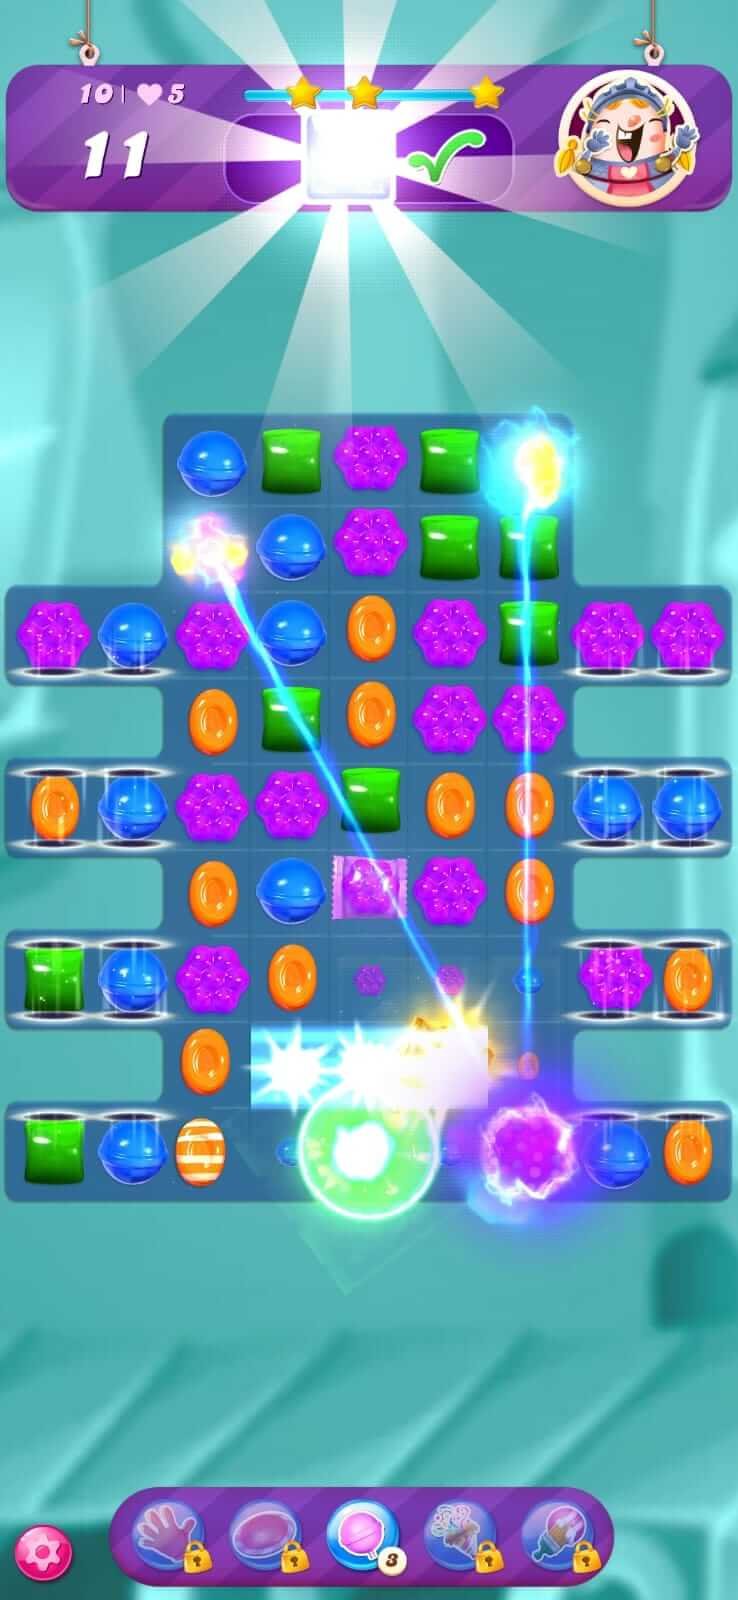 Candy Crush Saga v1.267.0.2 MOD APK [Unlocked All] for Android